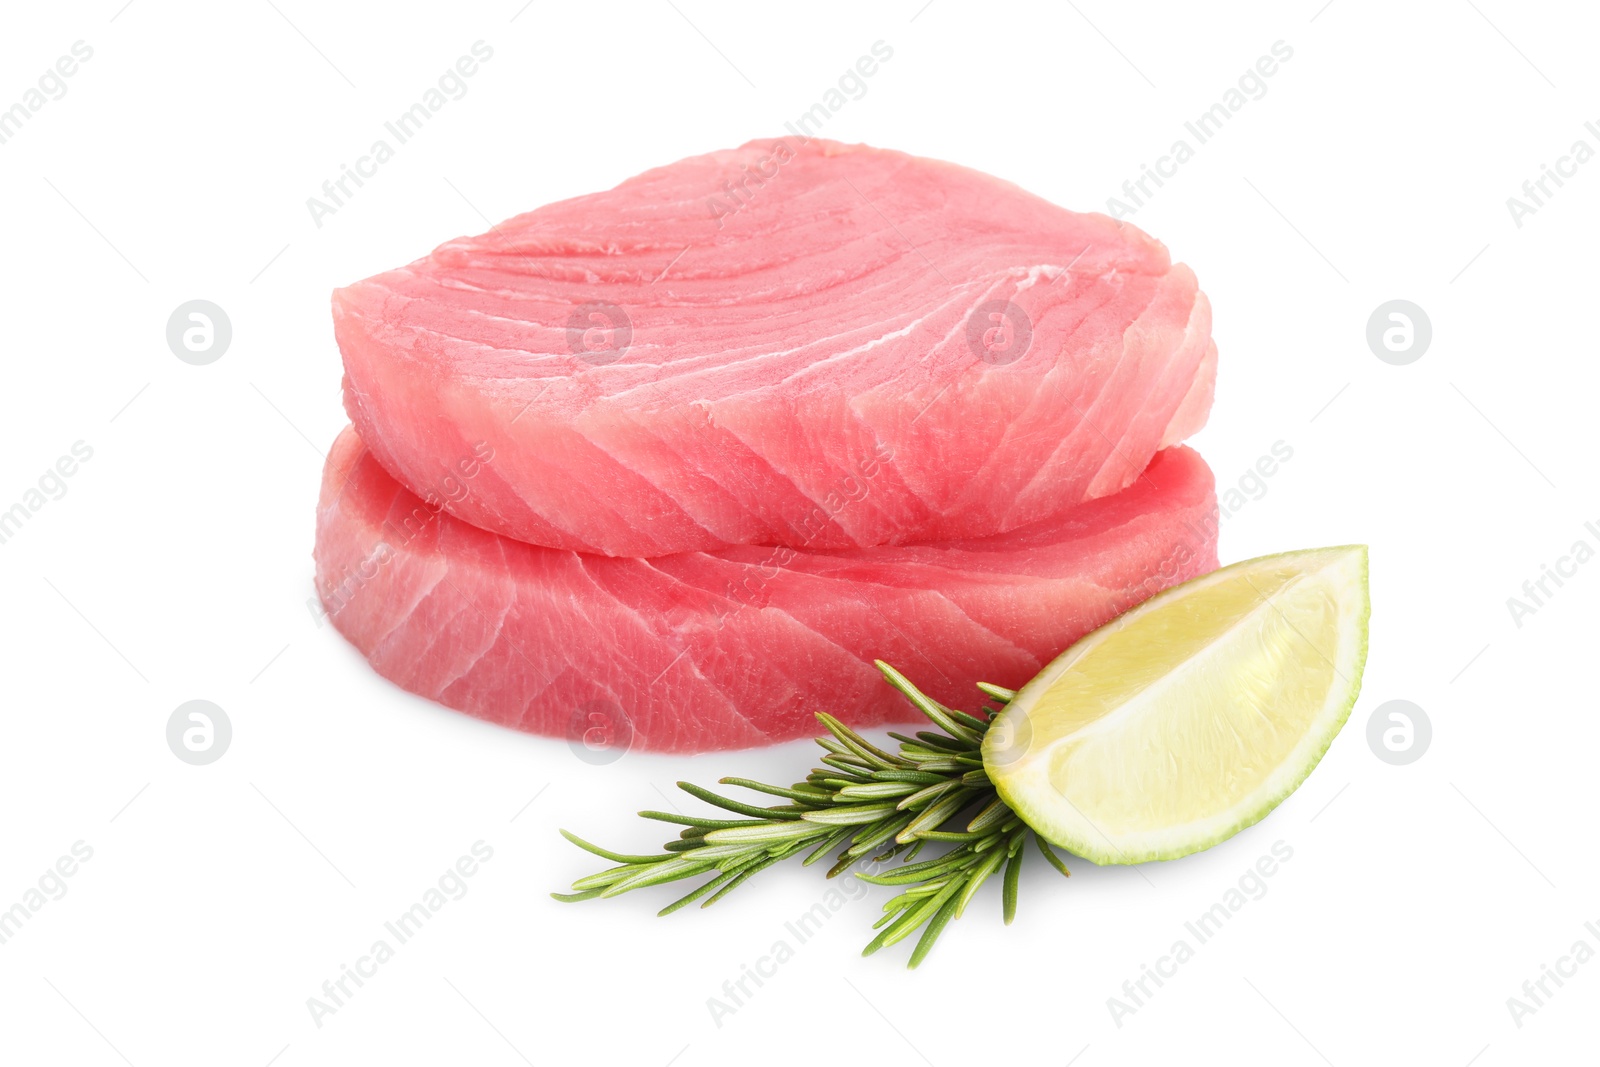 Photo of Raw tuna fillets with lime wedge and rosemary on white background